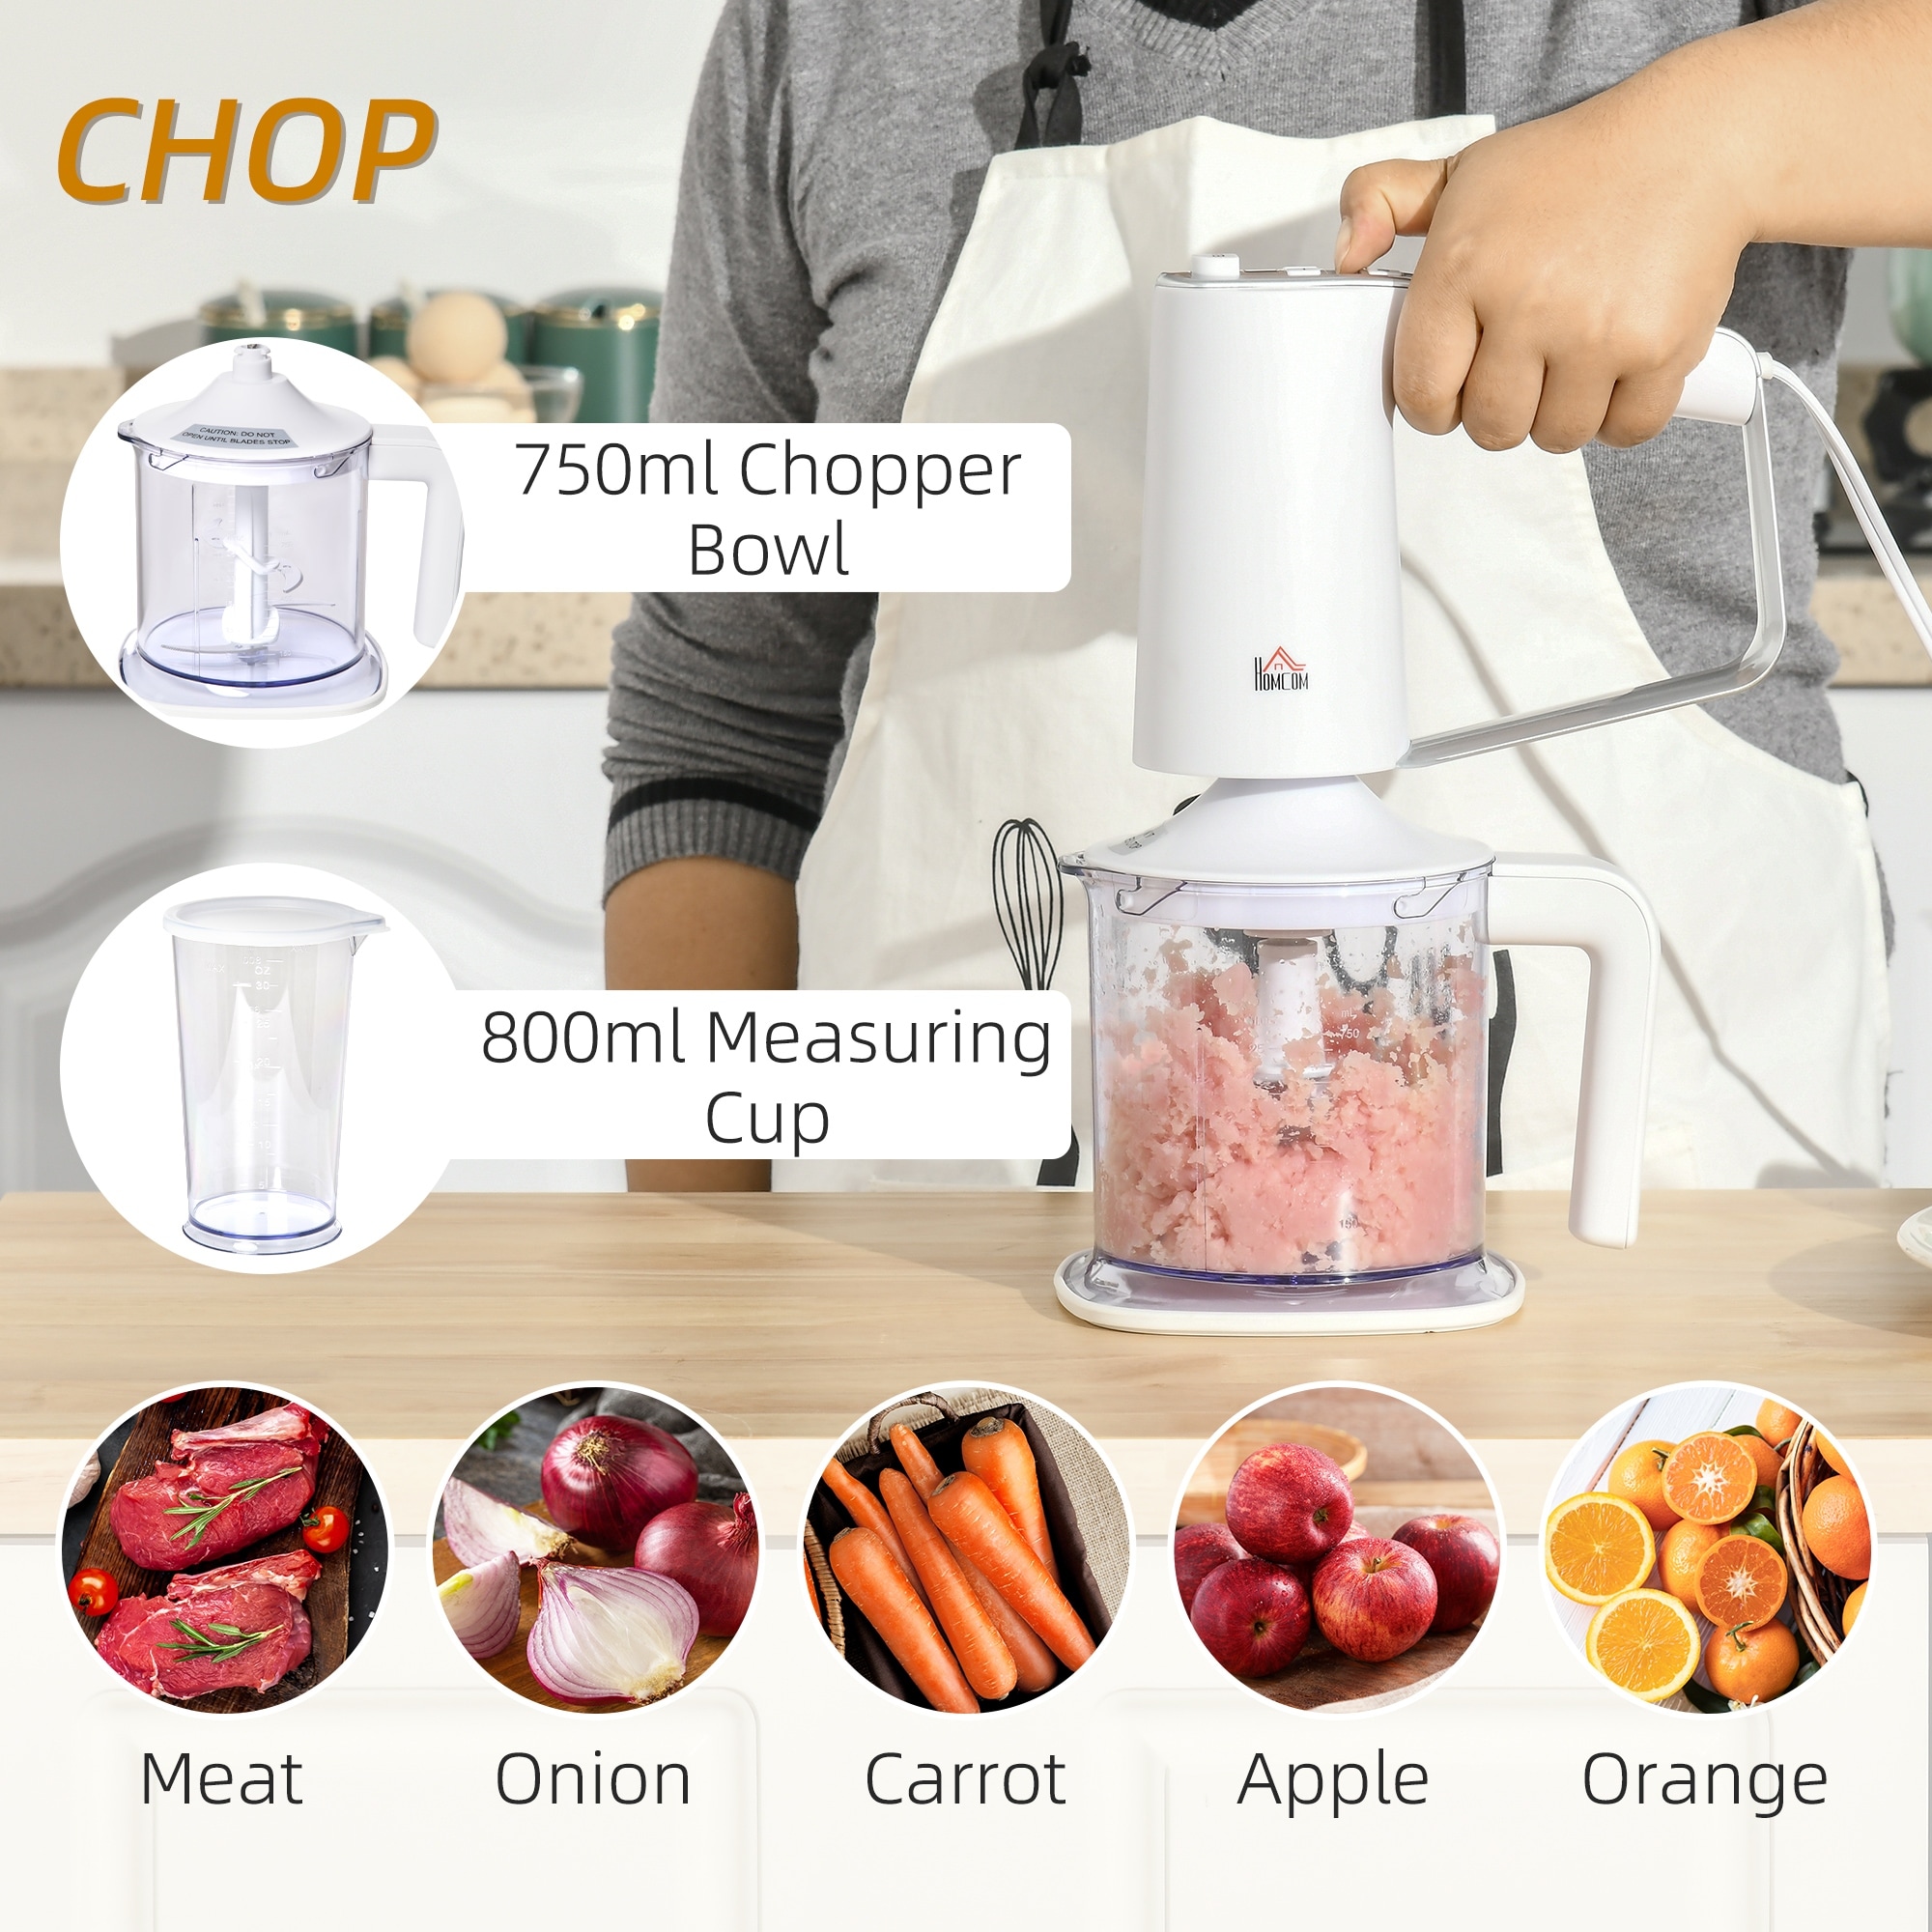 https://ak1.ostkcdn.com/images/products/is/images/direct/d8bd421d81b33b692e7bcc83f25d8434da0514c2/HOMCOM-5-in-1-Electric-Hand-Mixer%2C-300W-Immersion-Blender-with-5-Speeds%2C-Dough-Hooks%2C-Chopper%2C-Whisk%2C-Mixers%2C-and-Measuring-Cup.jpg